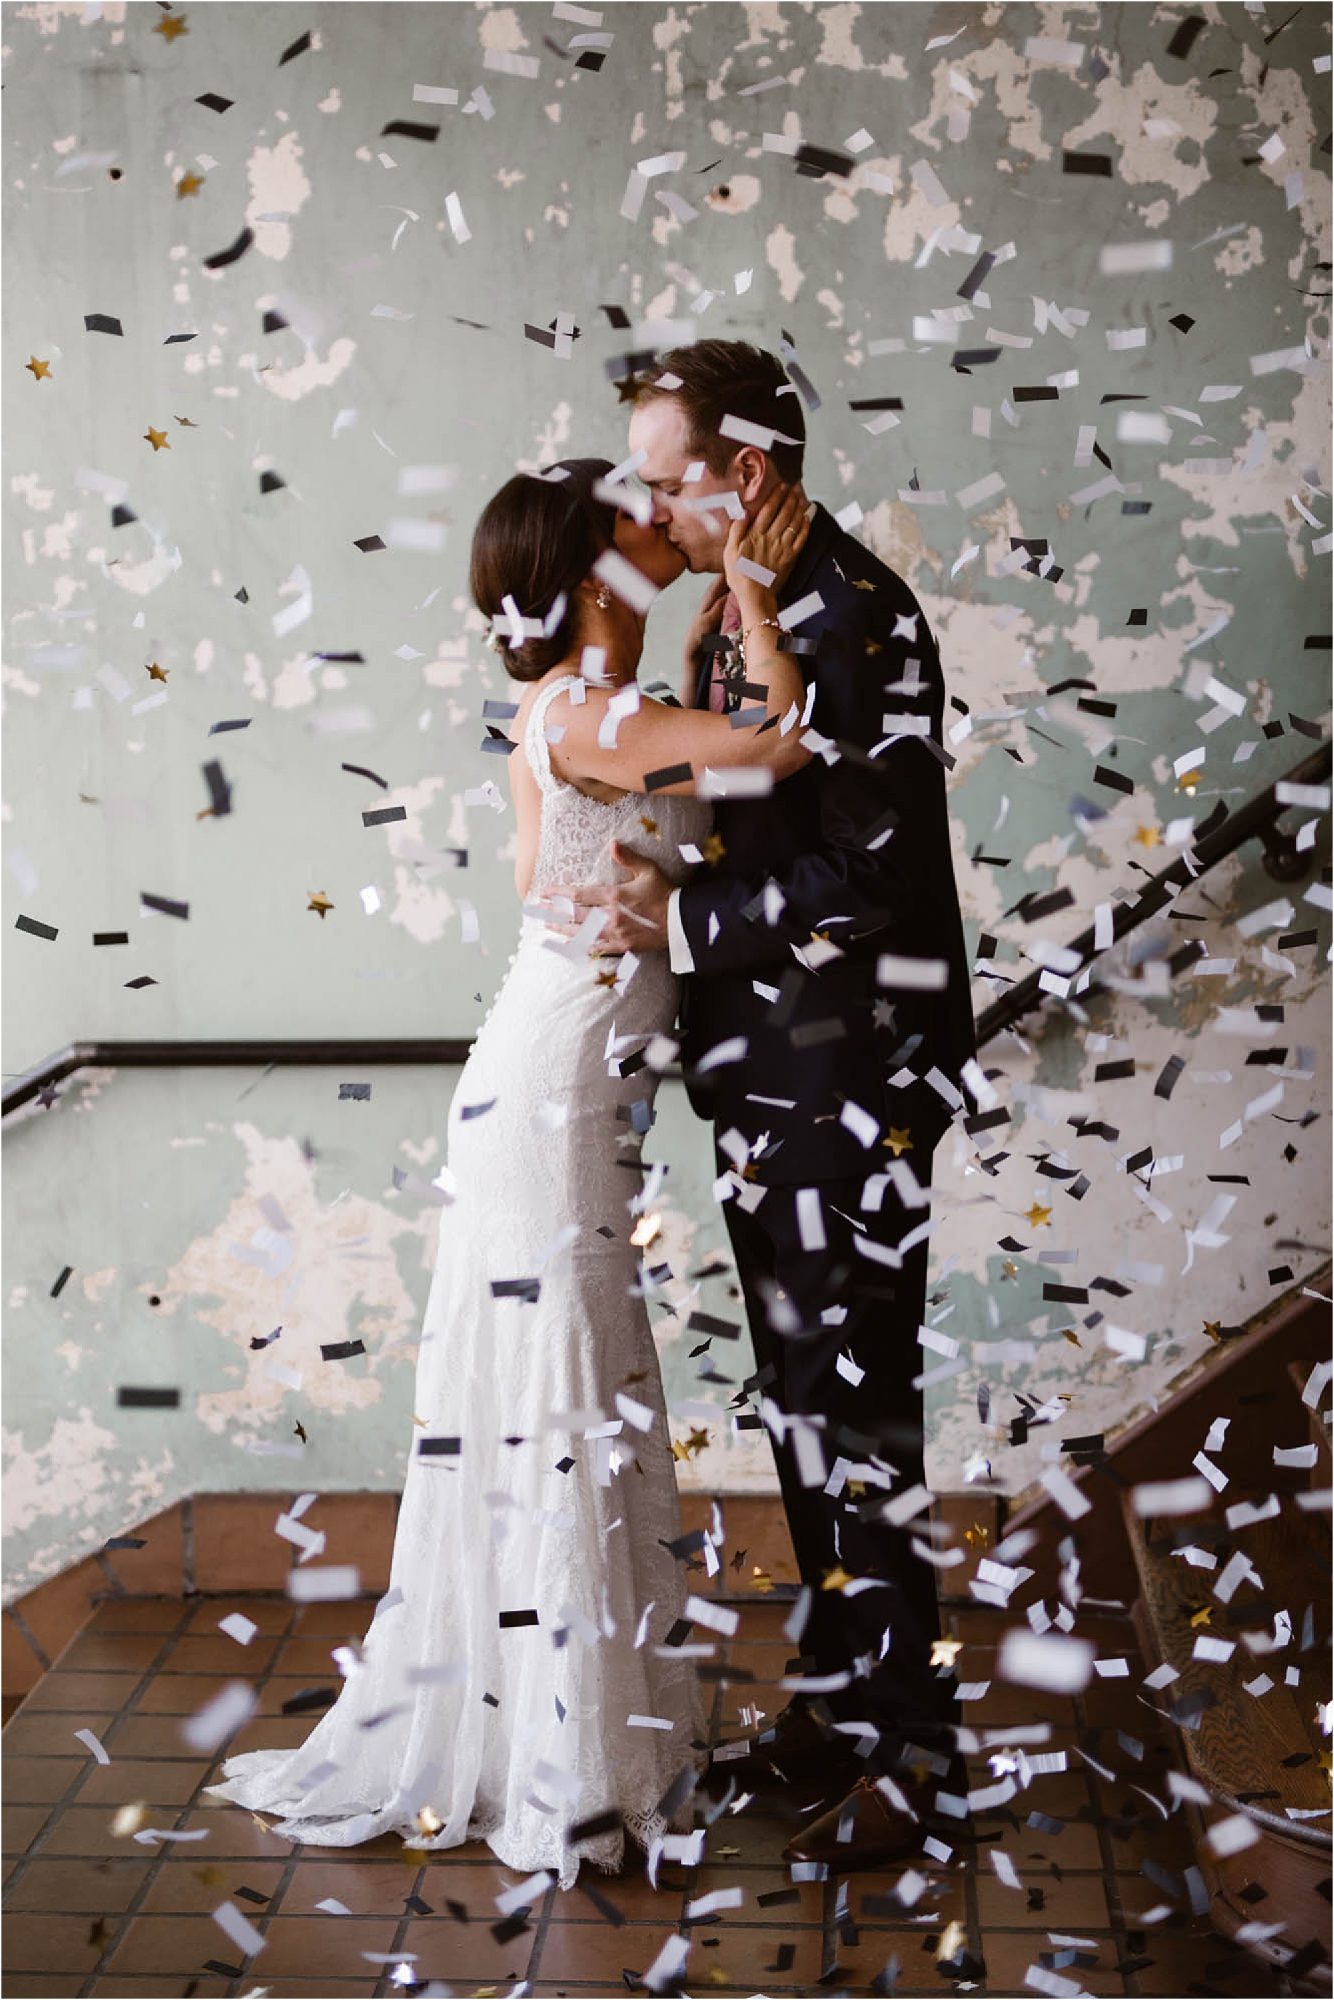 bride and groom kissing in confetti